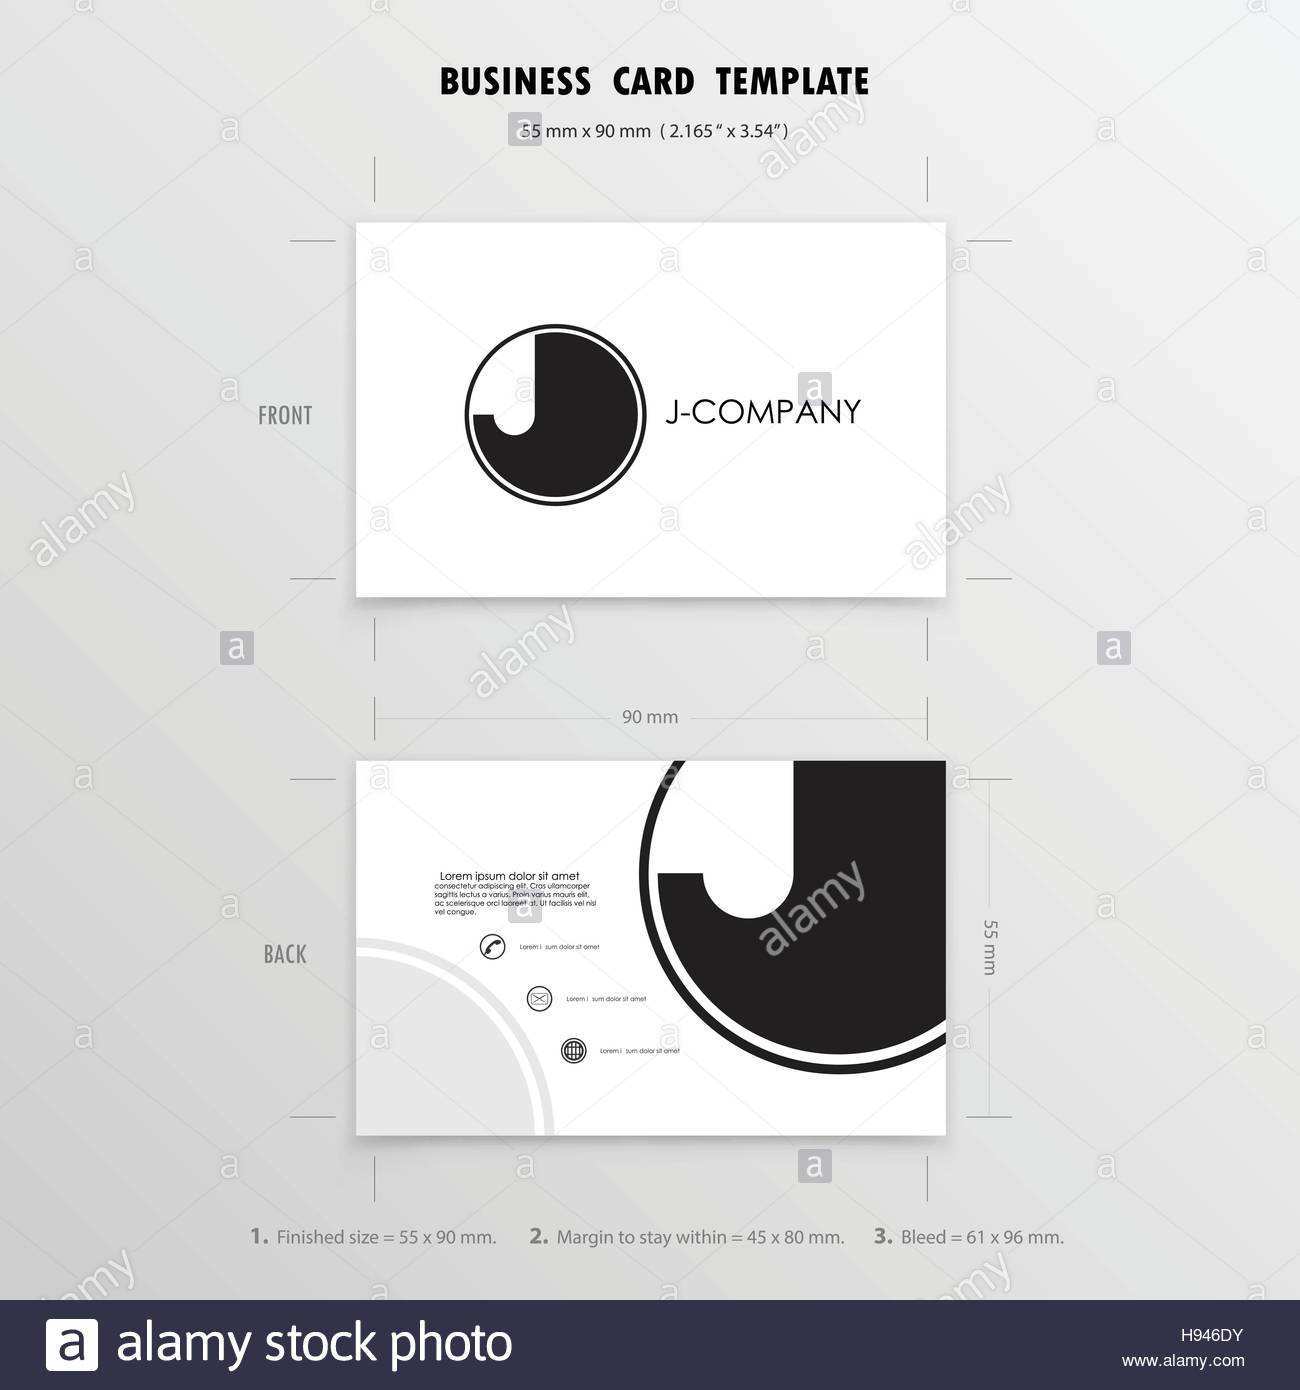 59 Create Name Card Design Template Size Layouts with Name Card Design Template Size